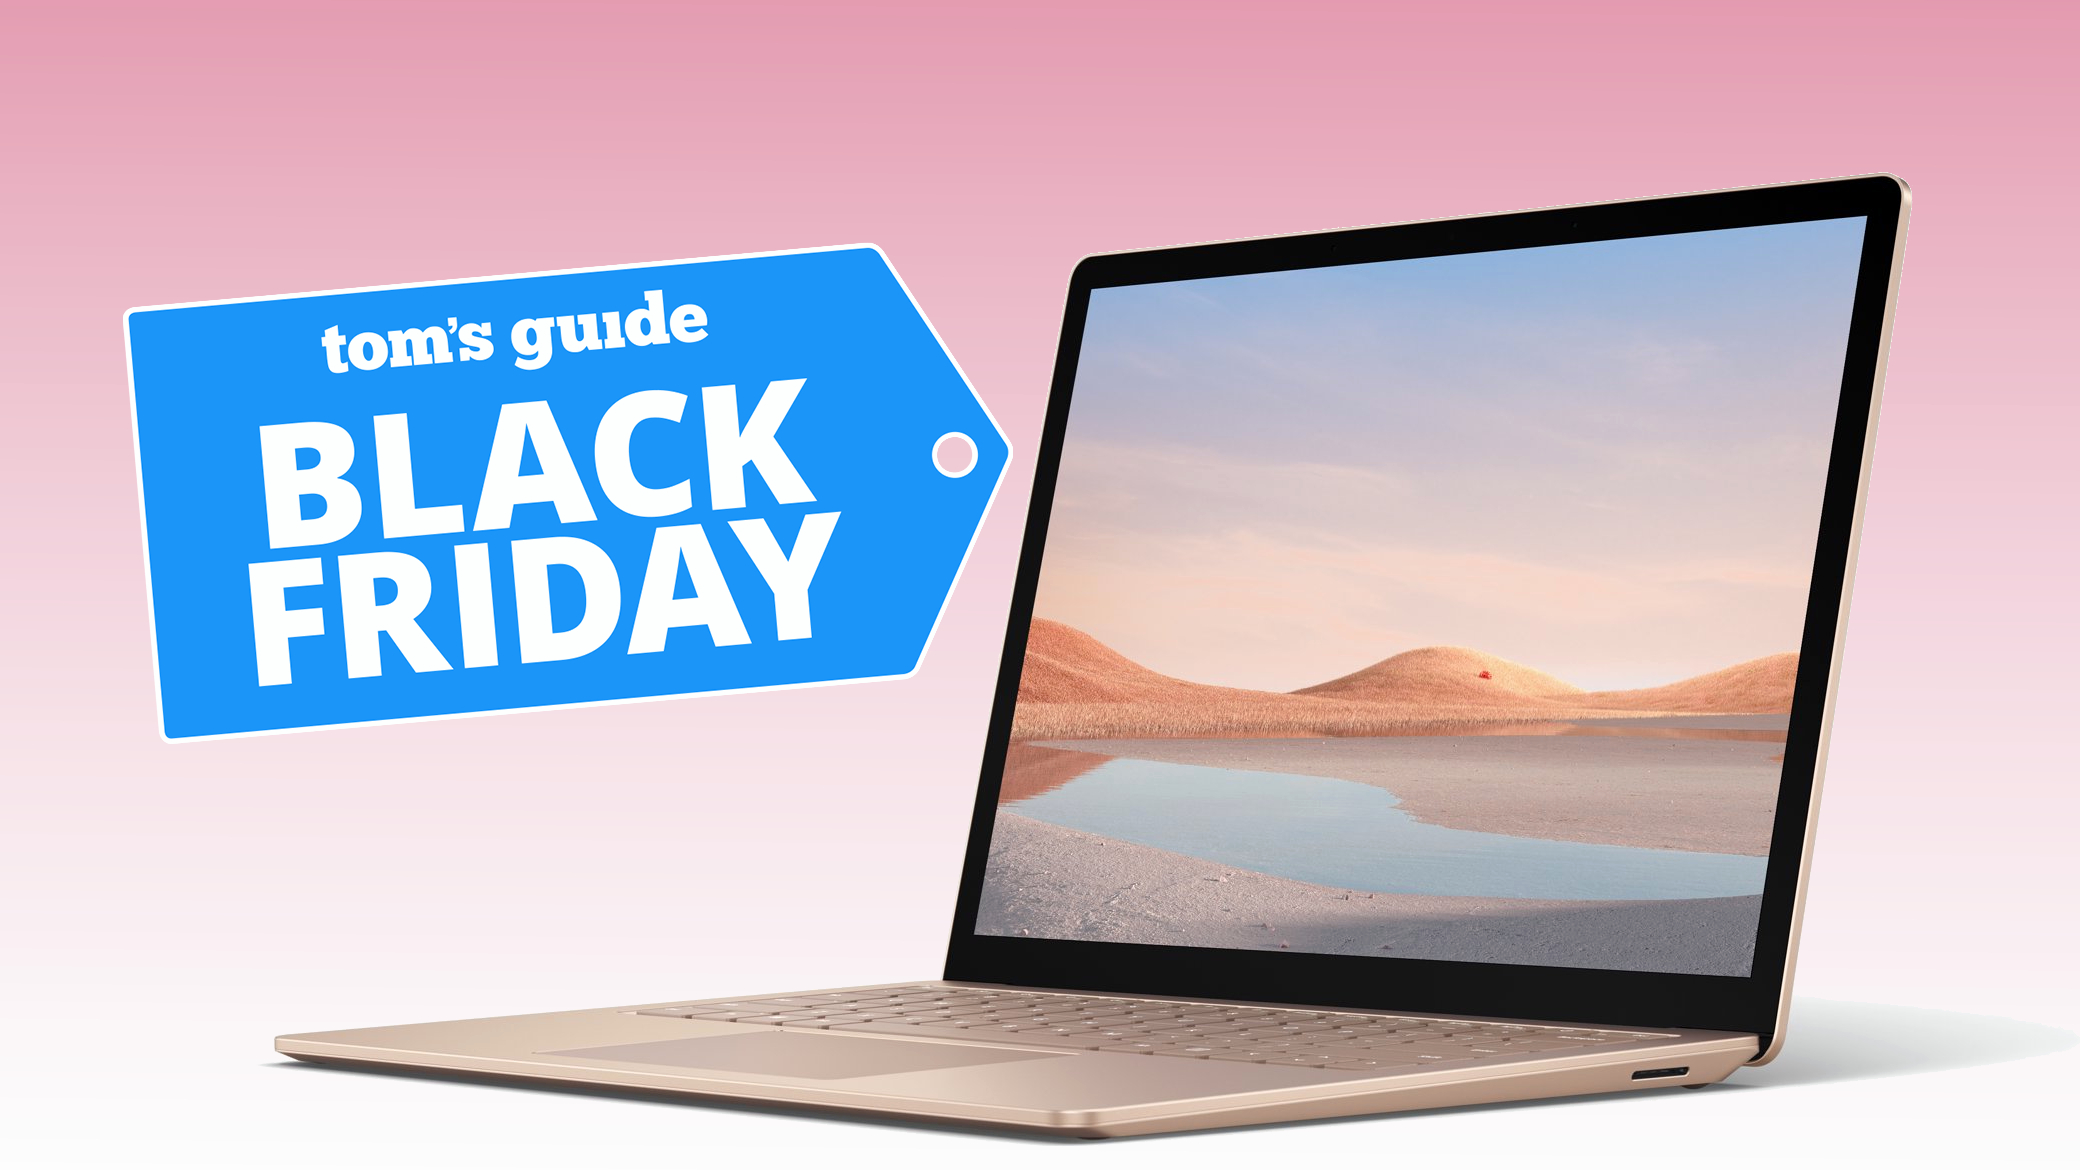 Microsoft Surface Laptop 4 on a colored background with a black friday deal badge superimposed